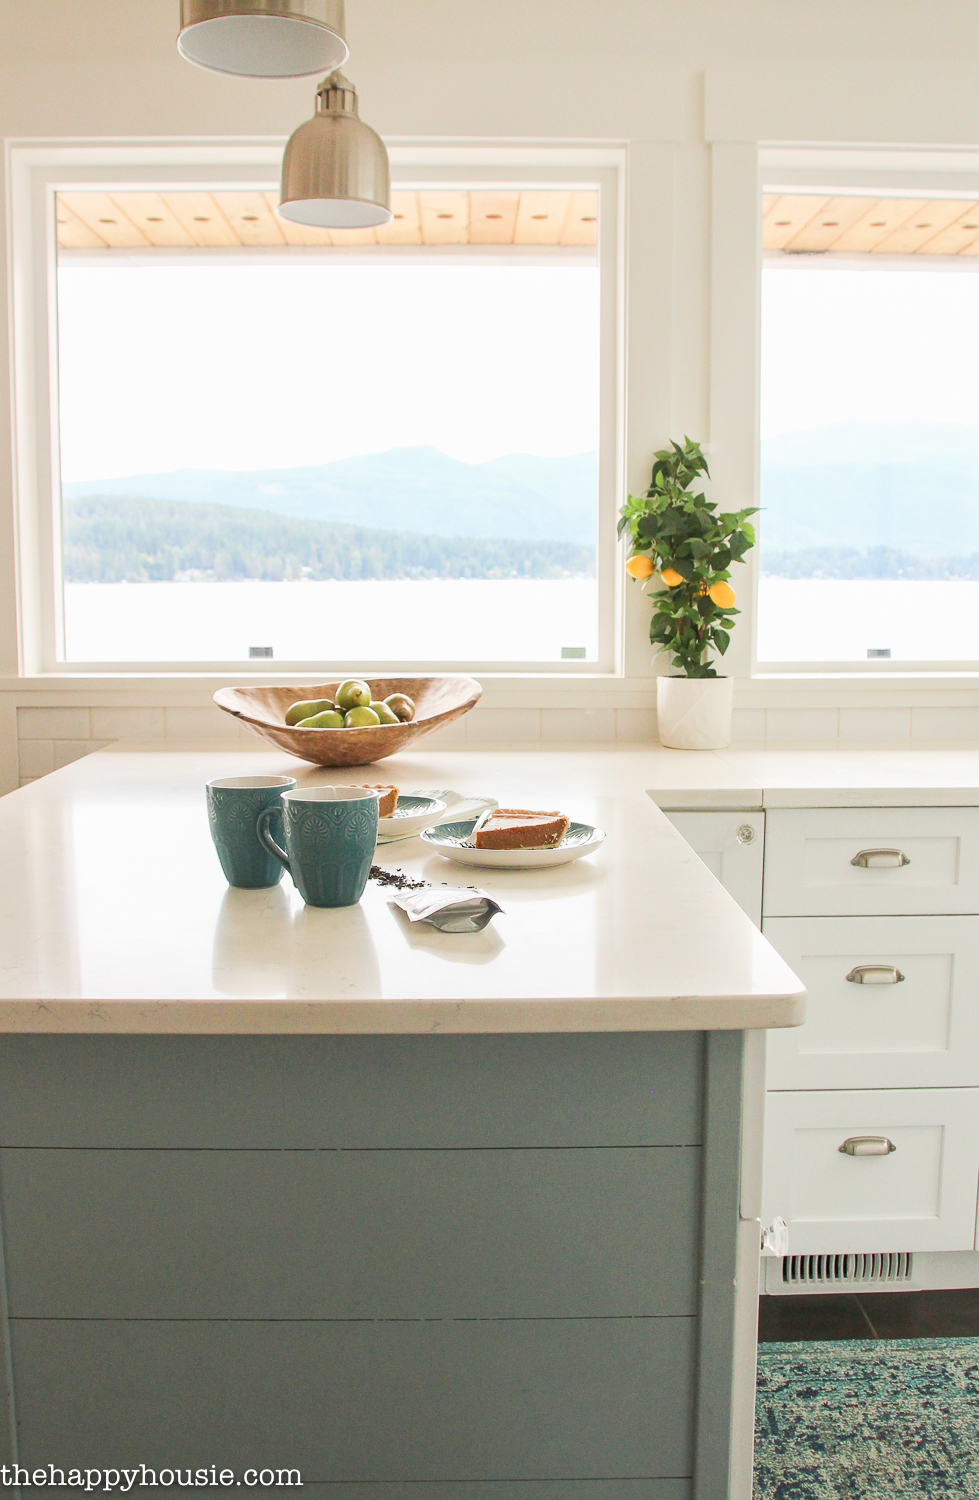 The white kitchen counters.